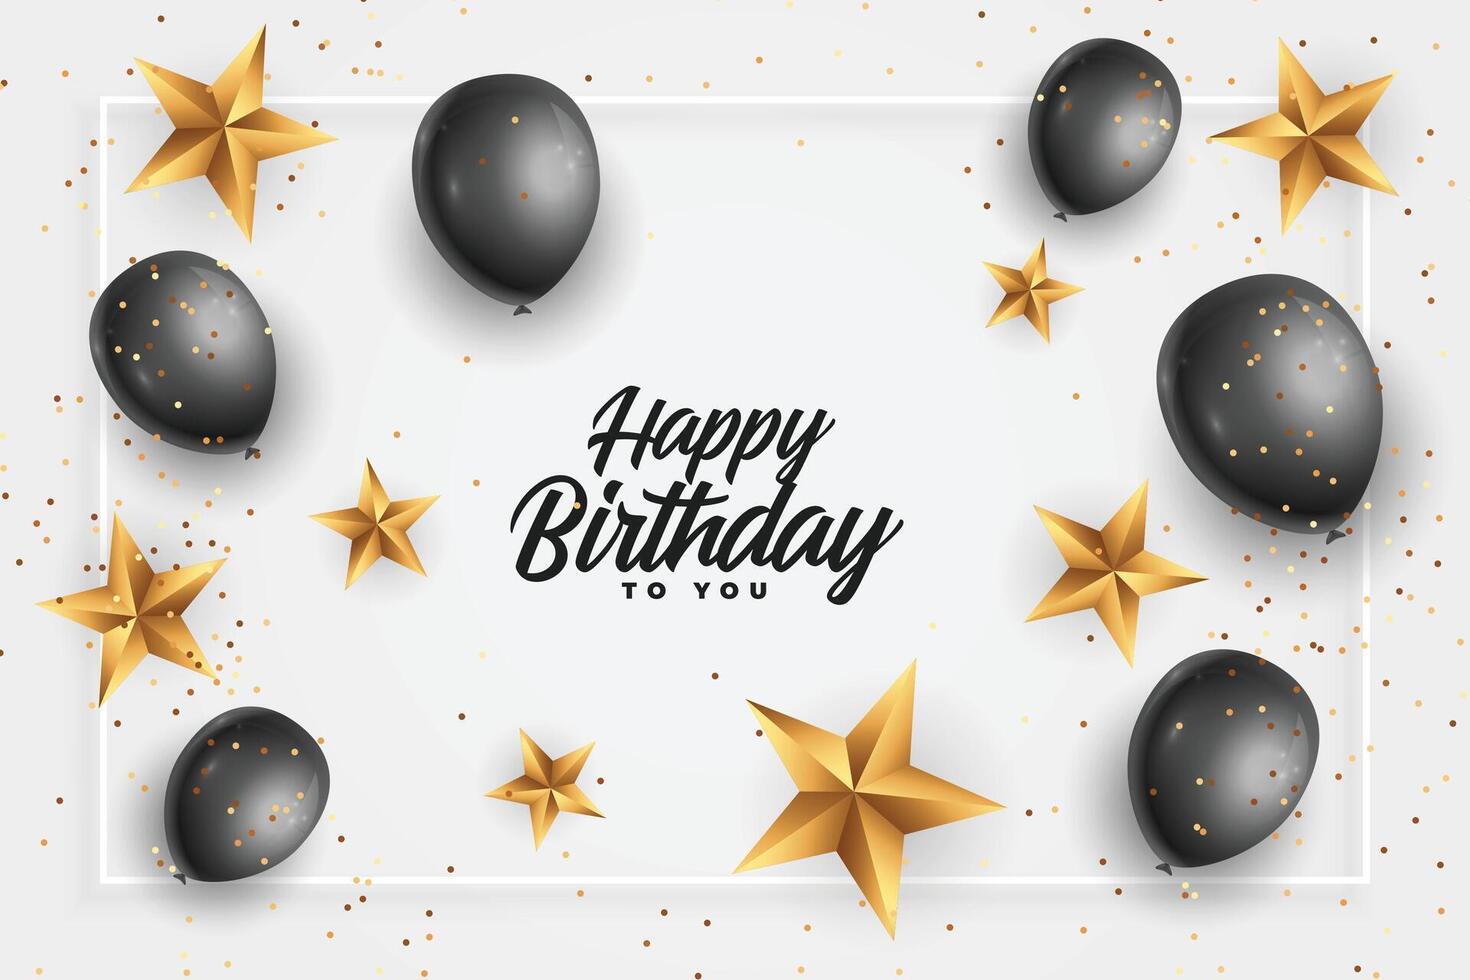 happy birthday card with golden stars and black balloons vector